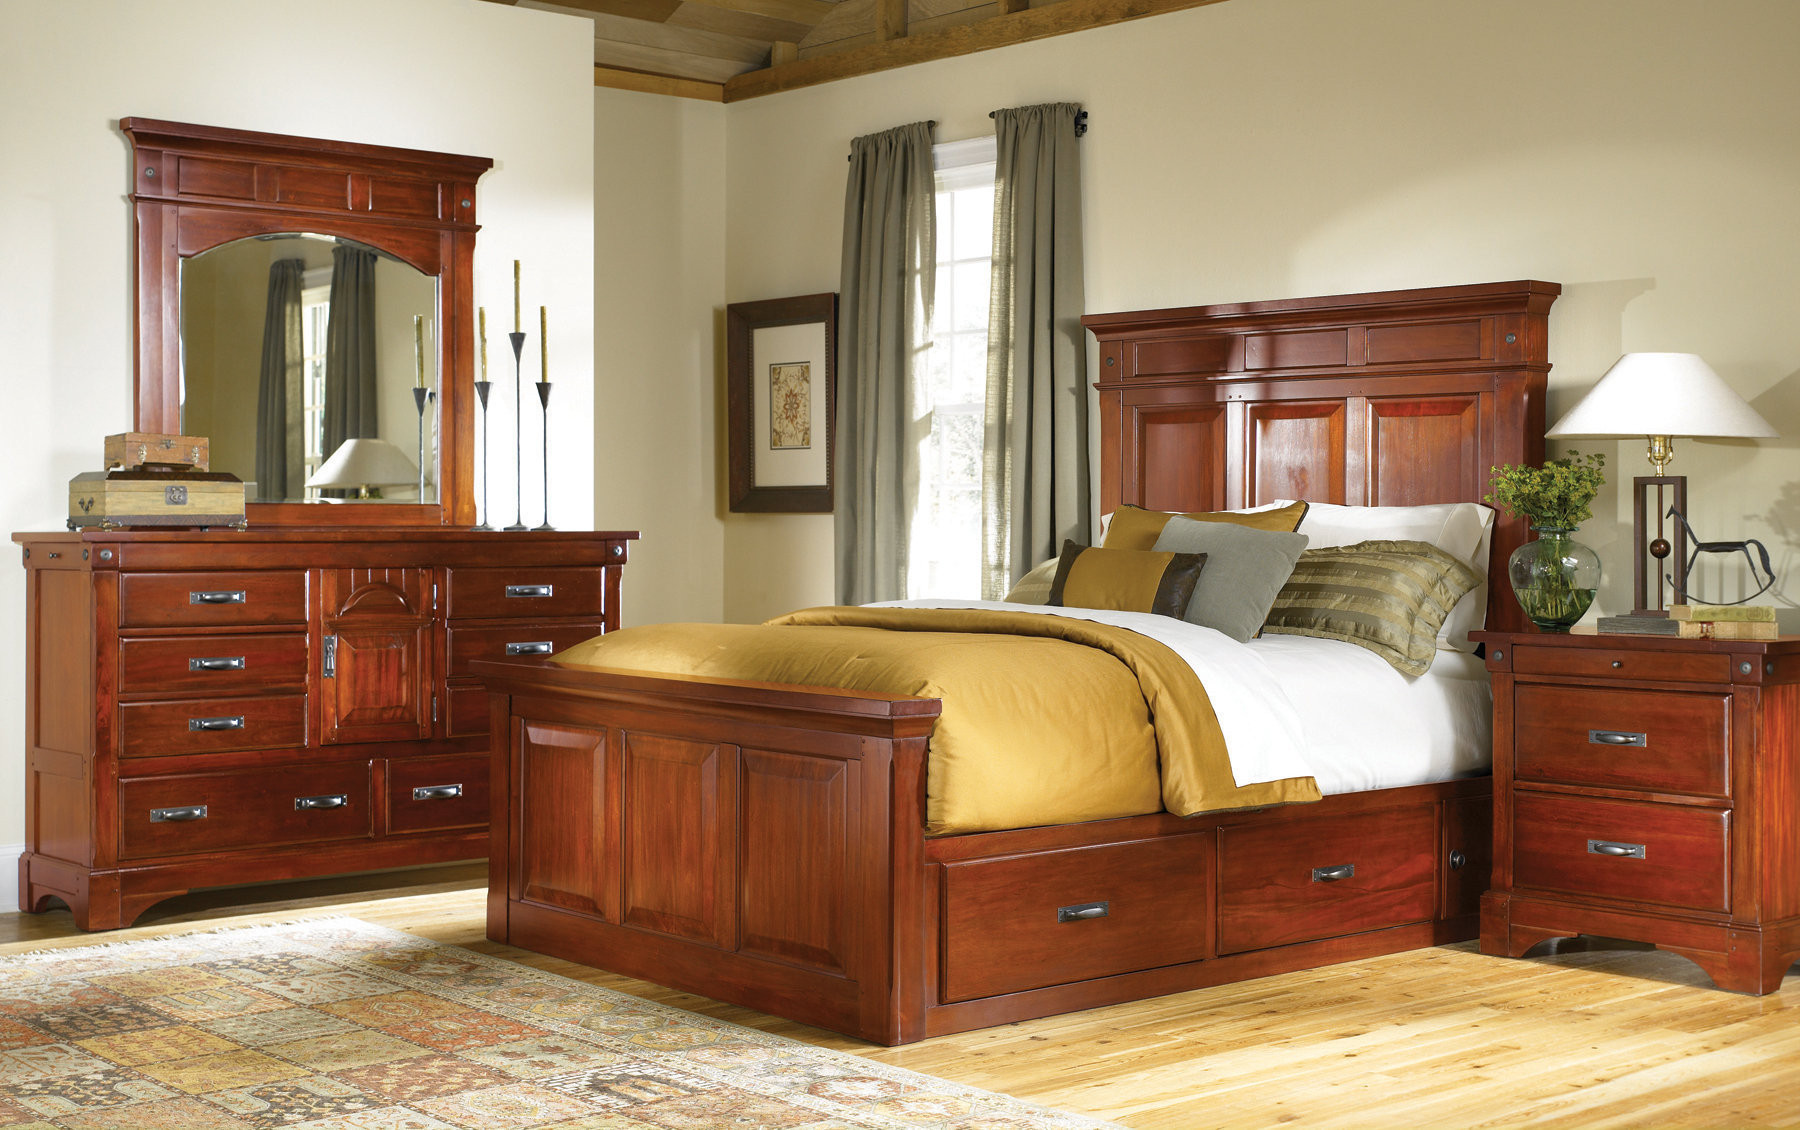 Bedroom Set With Storage
 Mahogany Storage Bed Classic King and Queen Solid Wood